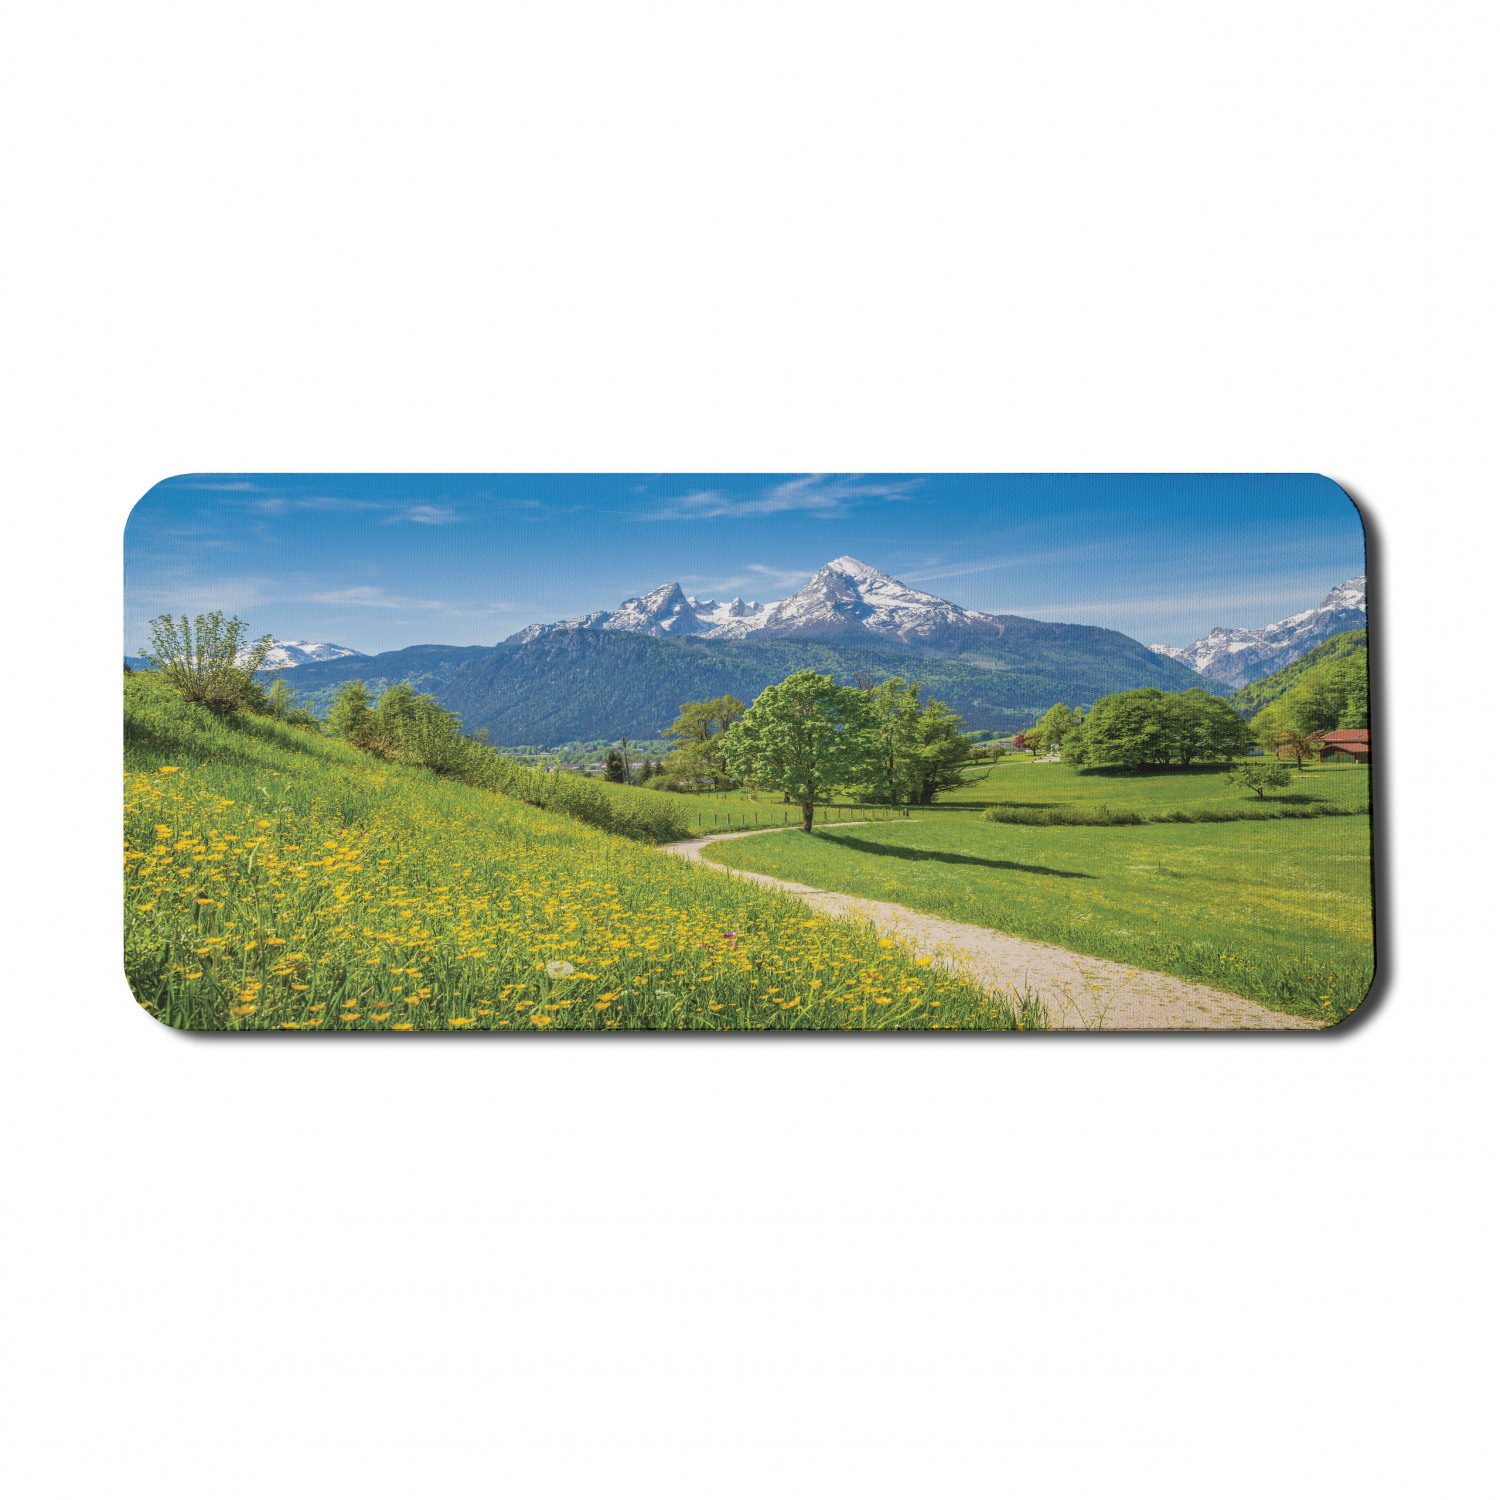 Mountain Computer Mouse Pad, Spring Scenery in Alps with Floral Grass and Snowy Mountain Tops in Rural Village, Rectangle Non-Slip Rubber Mousepad X-Large, 35" x 15", Multicolor, by Ambesonne - image 1 of 2